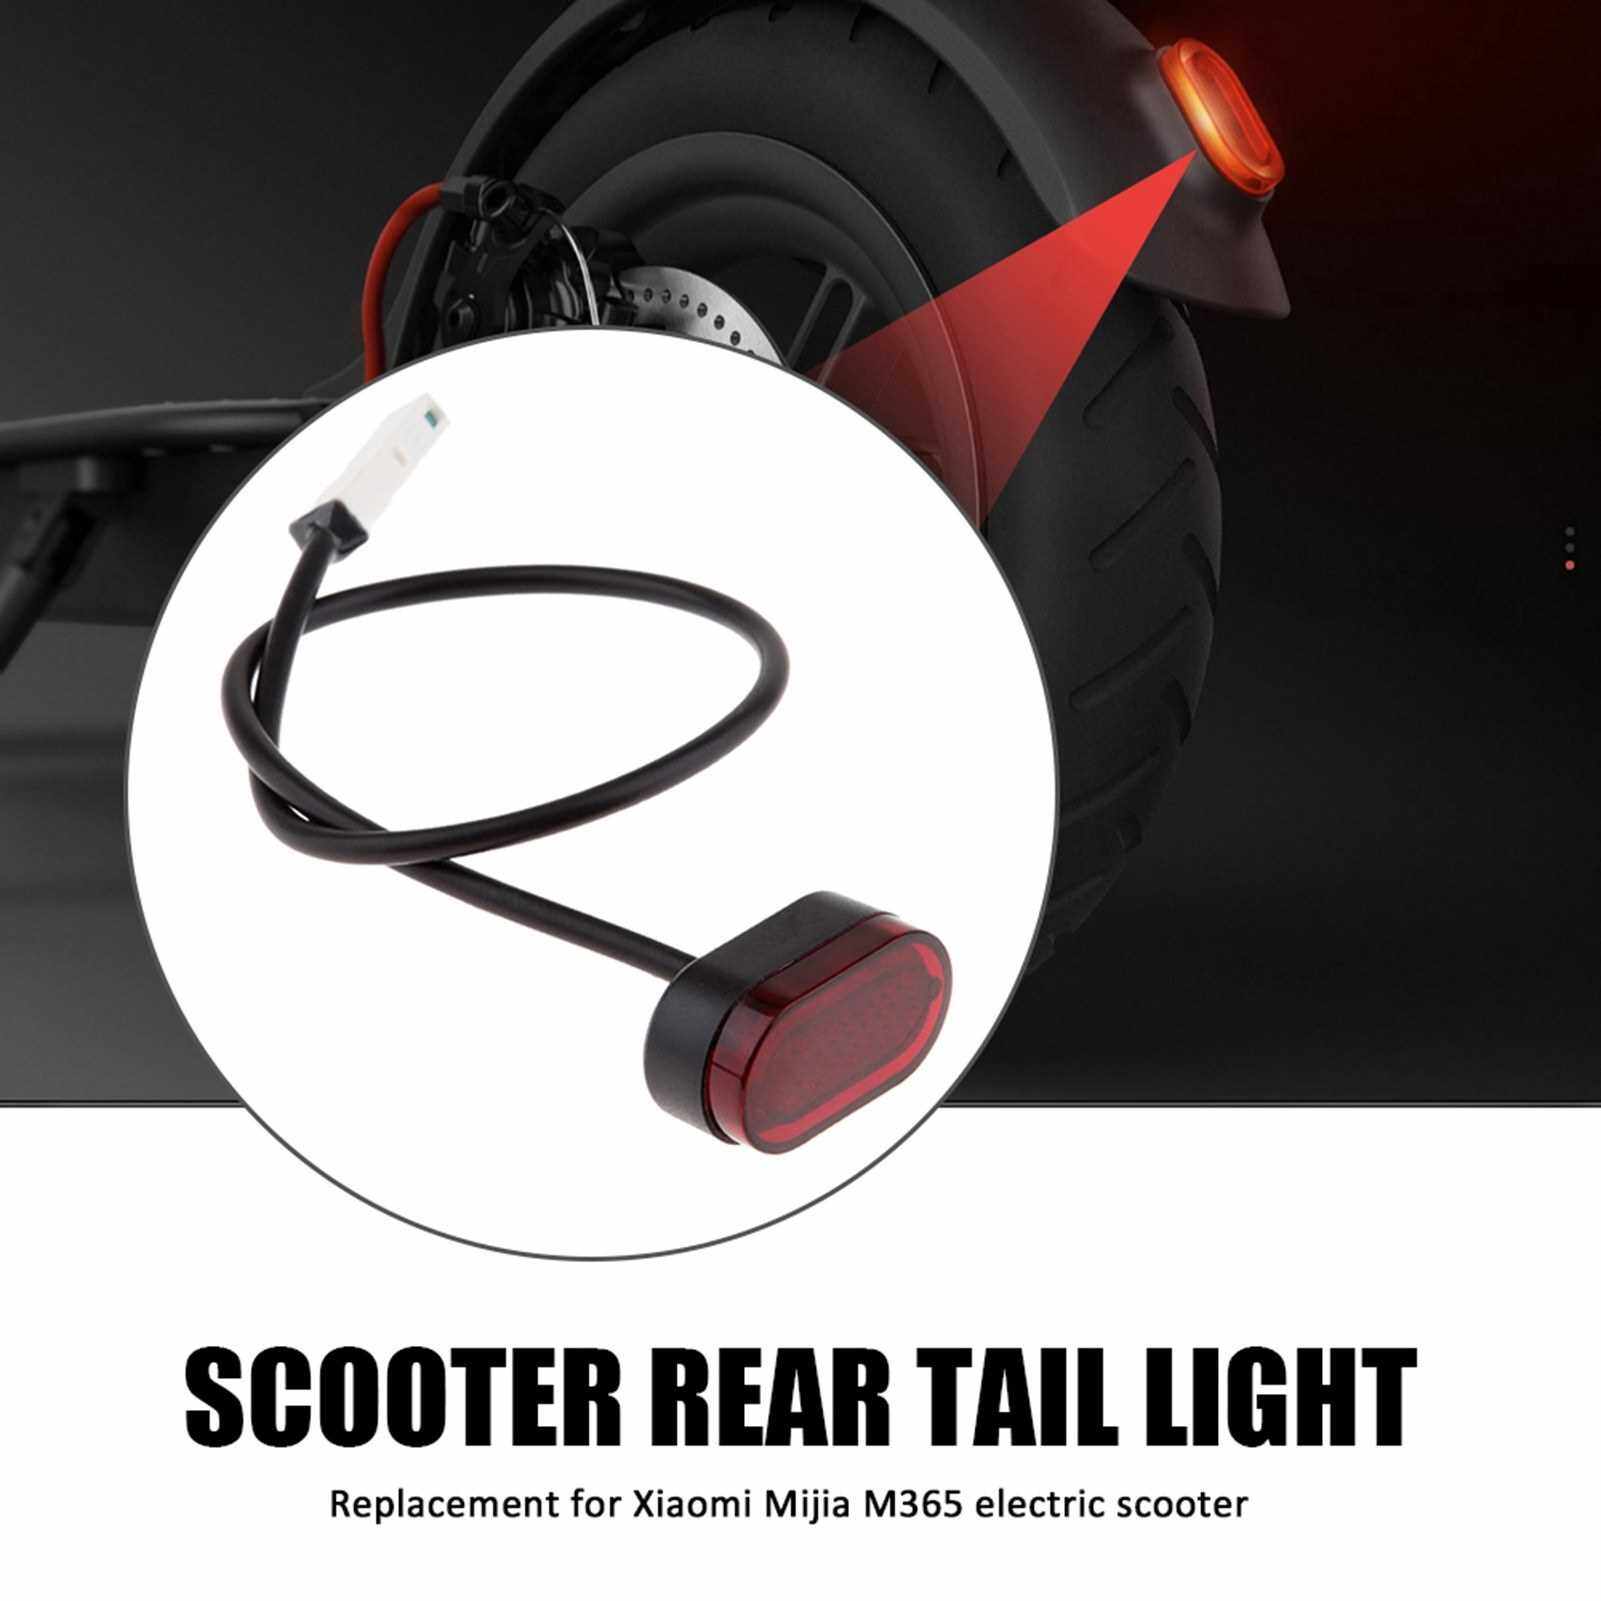 Best Selling Replacement Rear Tail Light Replacement for Xiaomi Mijia M365 Electric Scooter Skateboard Safety Warning Replacement Parts (Standard)